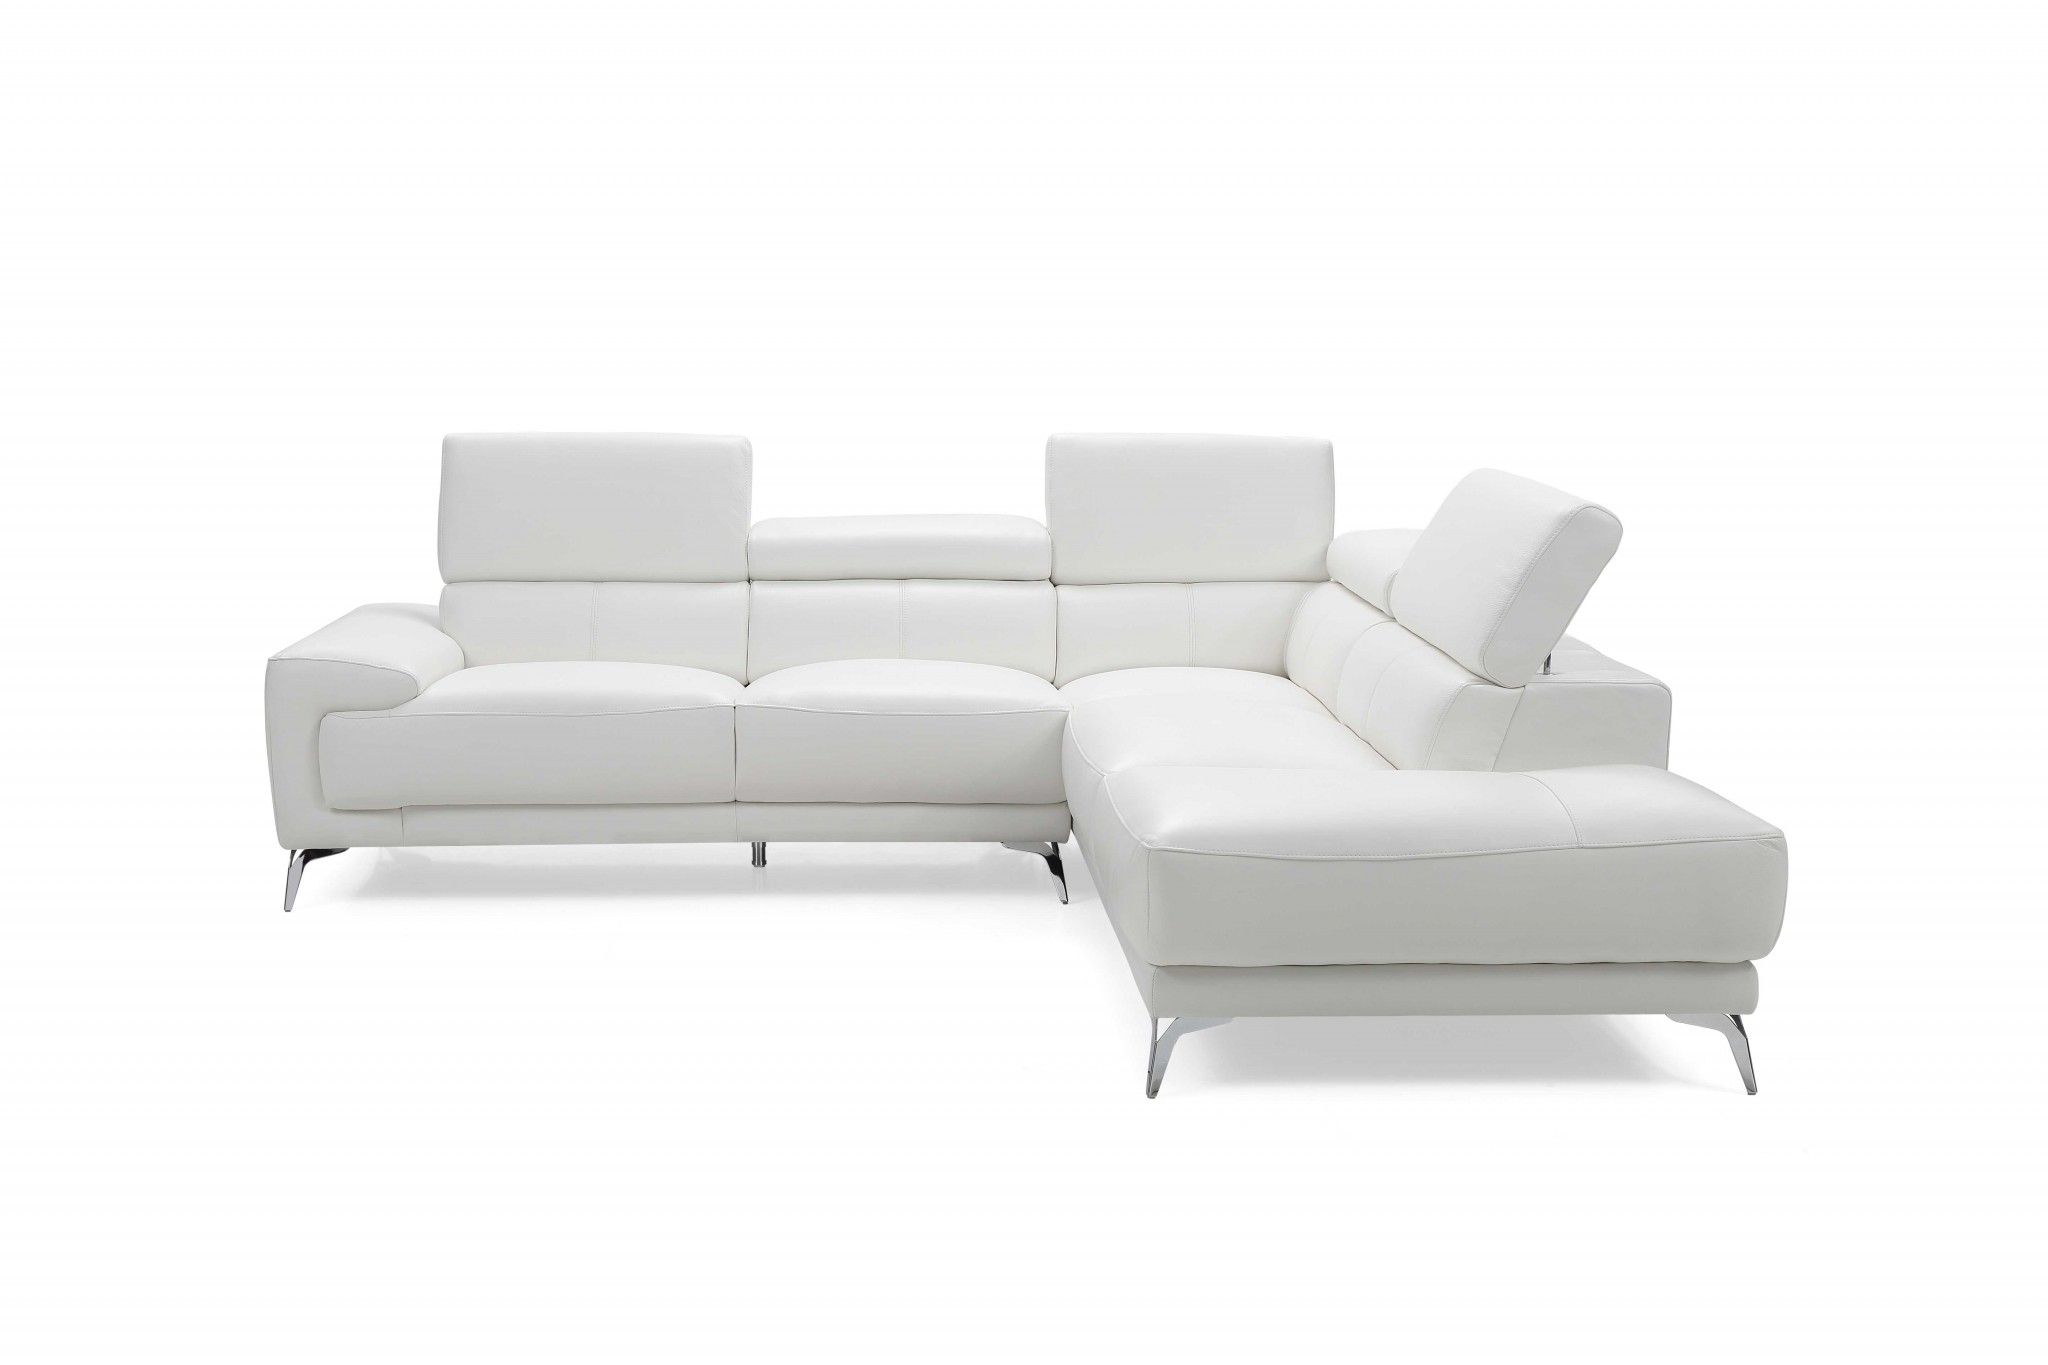 Sectional, Chaise On Right When Facing, White Top Grain Regarding [%Matilda 100% Top Grain Leather Chaise Sectional Sofas|Matilda 100% Top Grain Leather Chaise Sectional Sofas%] (View 7 of 15)